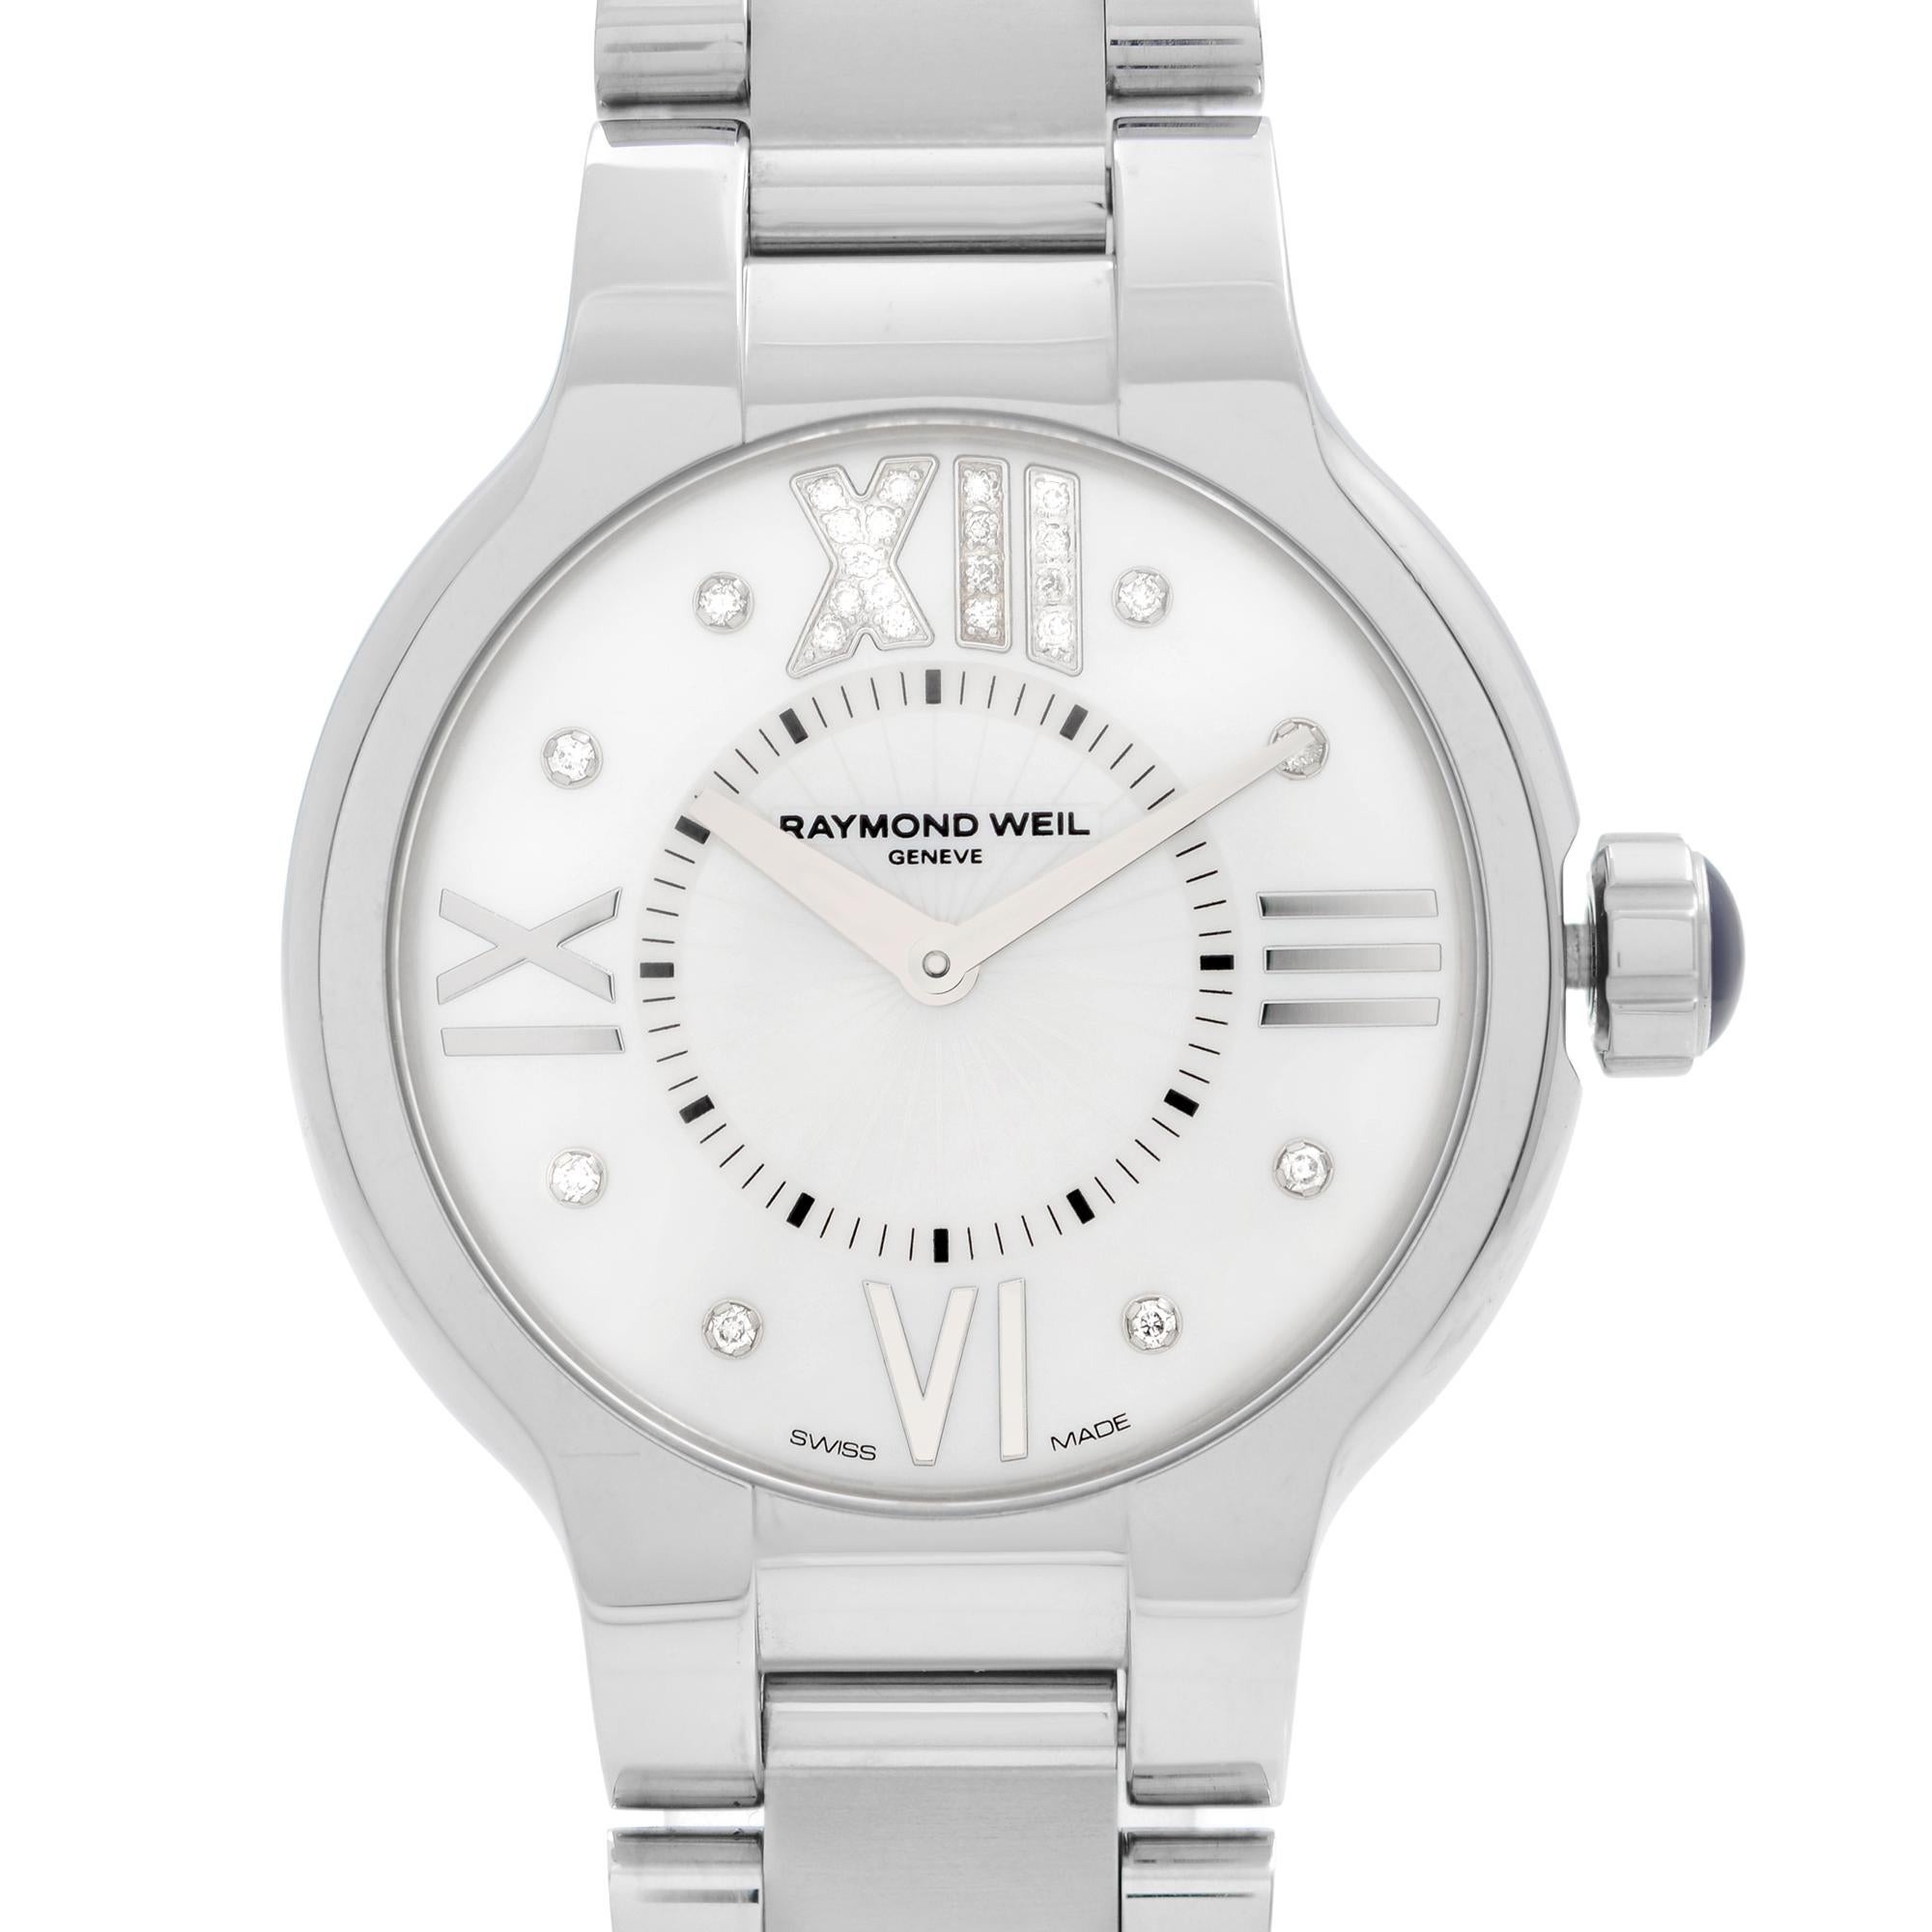 Store Display Model Raymond Weil Noemia Steel Diamond MOP Dial Quartz Ladies Watch 5932-ST-00990. This Beautiful Timepiece Features: Stainless Steel Case and Bracelet, Fixed Stainless Steel Bezel, Mother of Pearl White Dial Set with Diamonds with